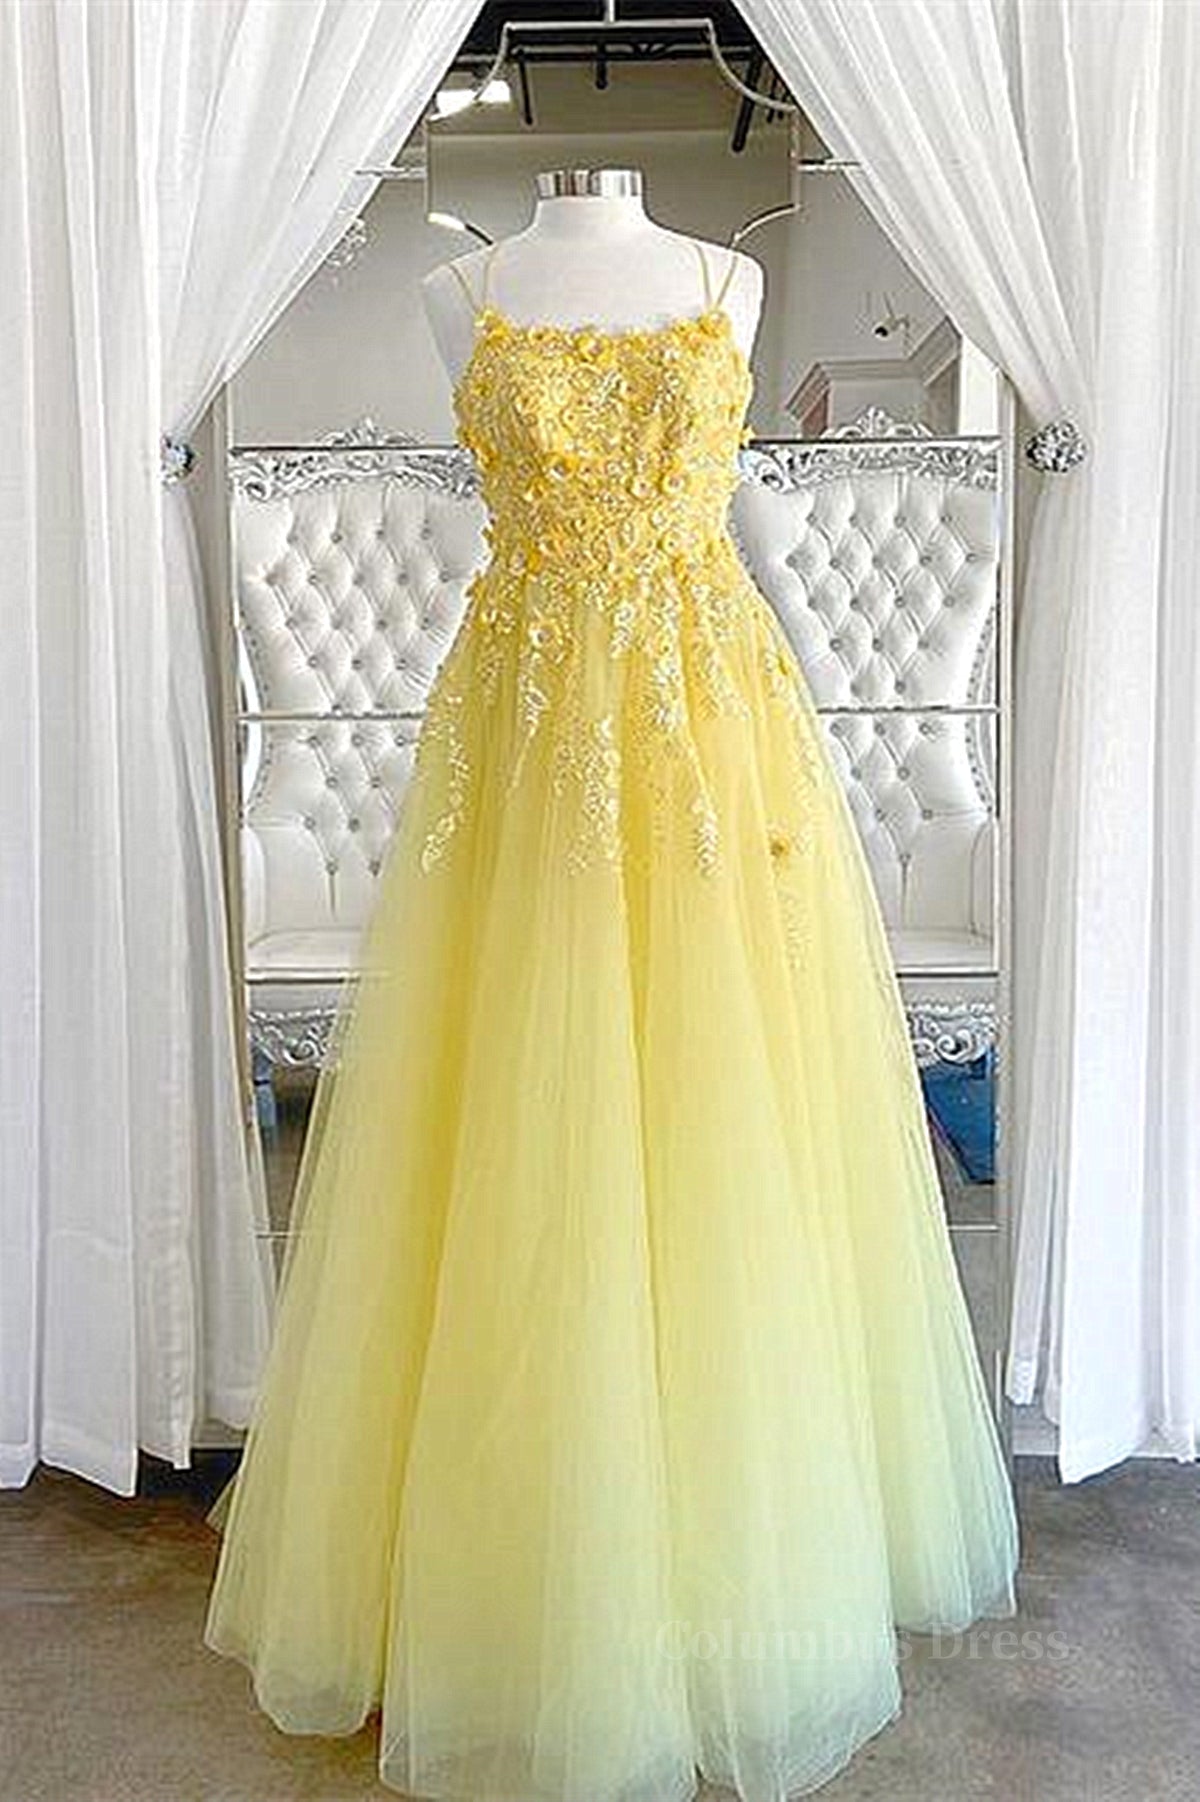 Shiny Yellow Lace Floral Corset Prom Dresses, Shiny Yellow Lace Floral Corset Formal Evening Dresses outfit, Formal Dresses